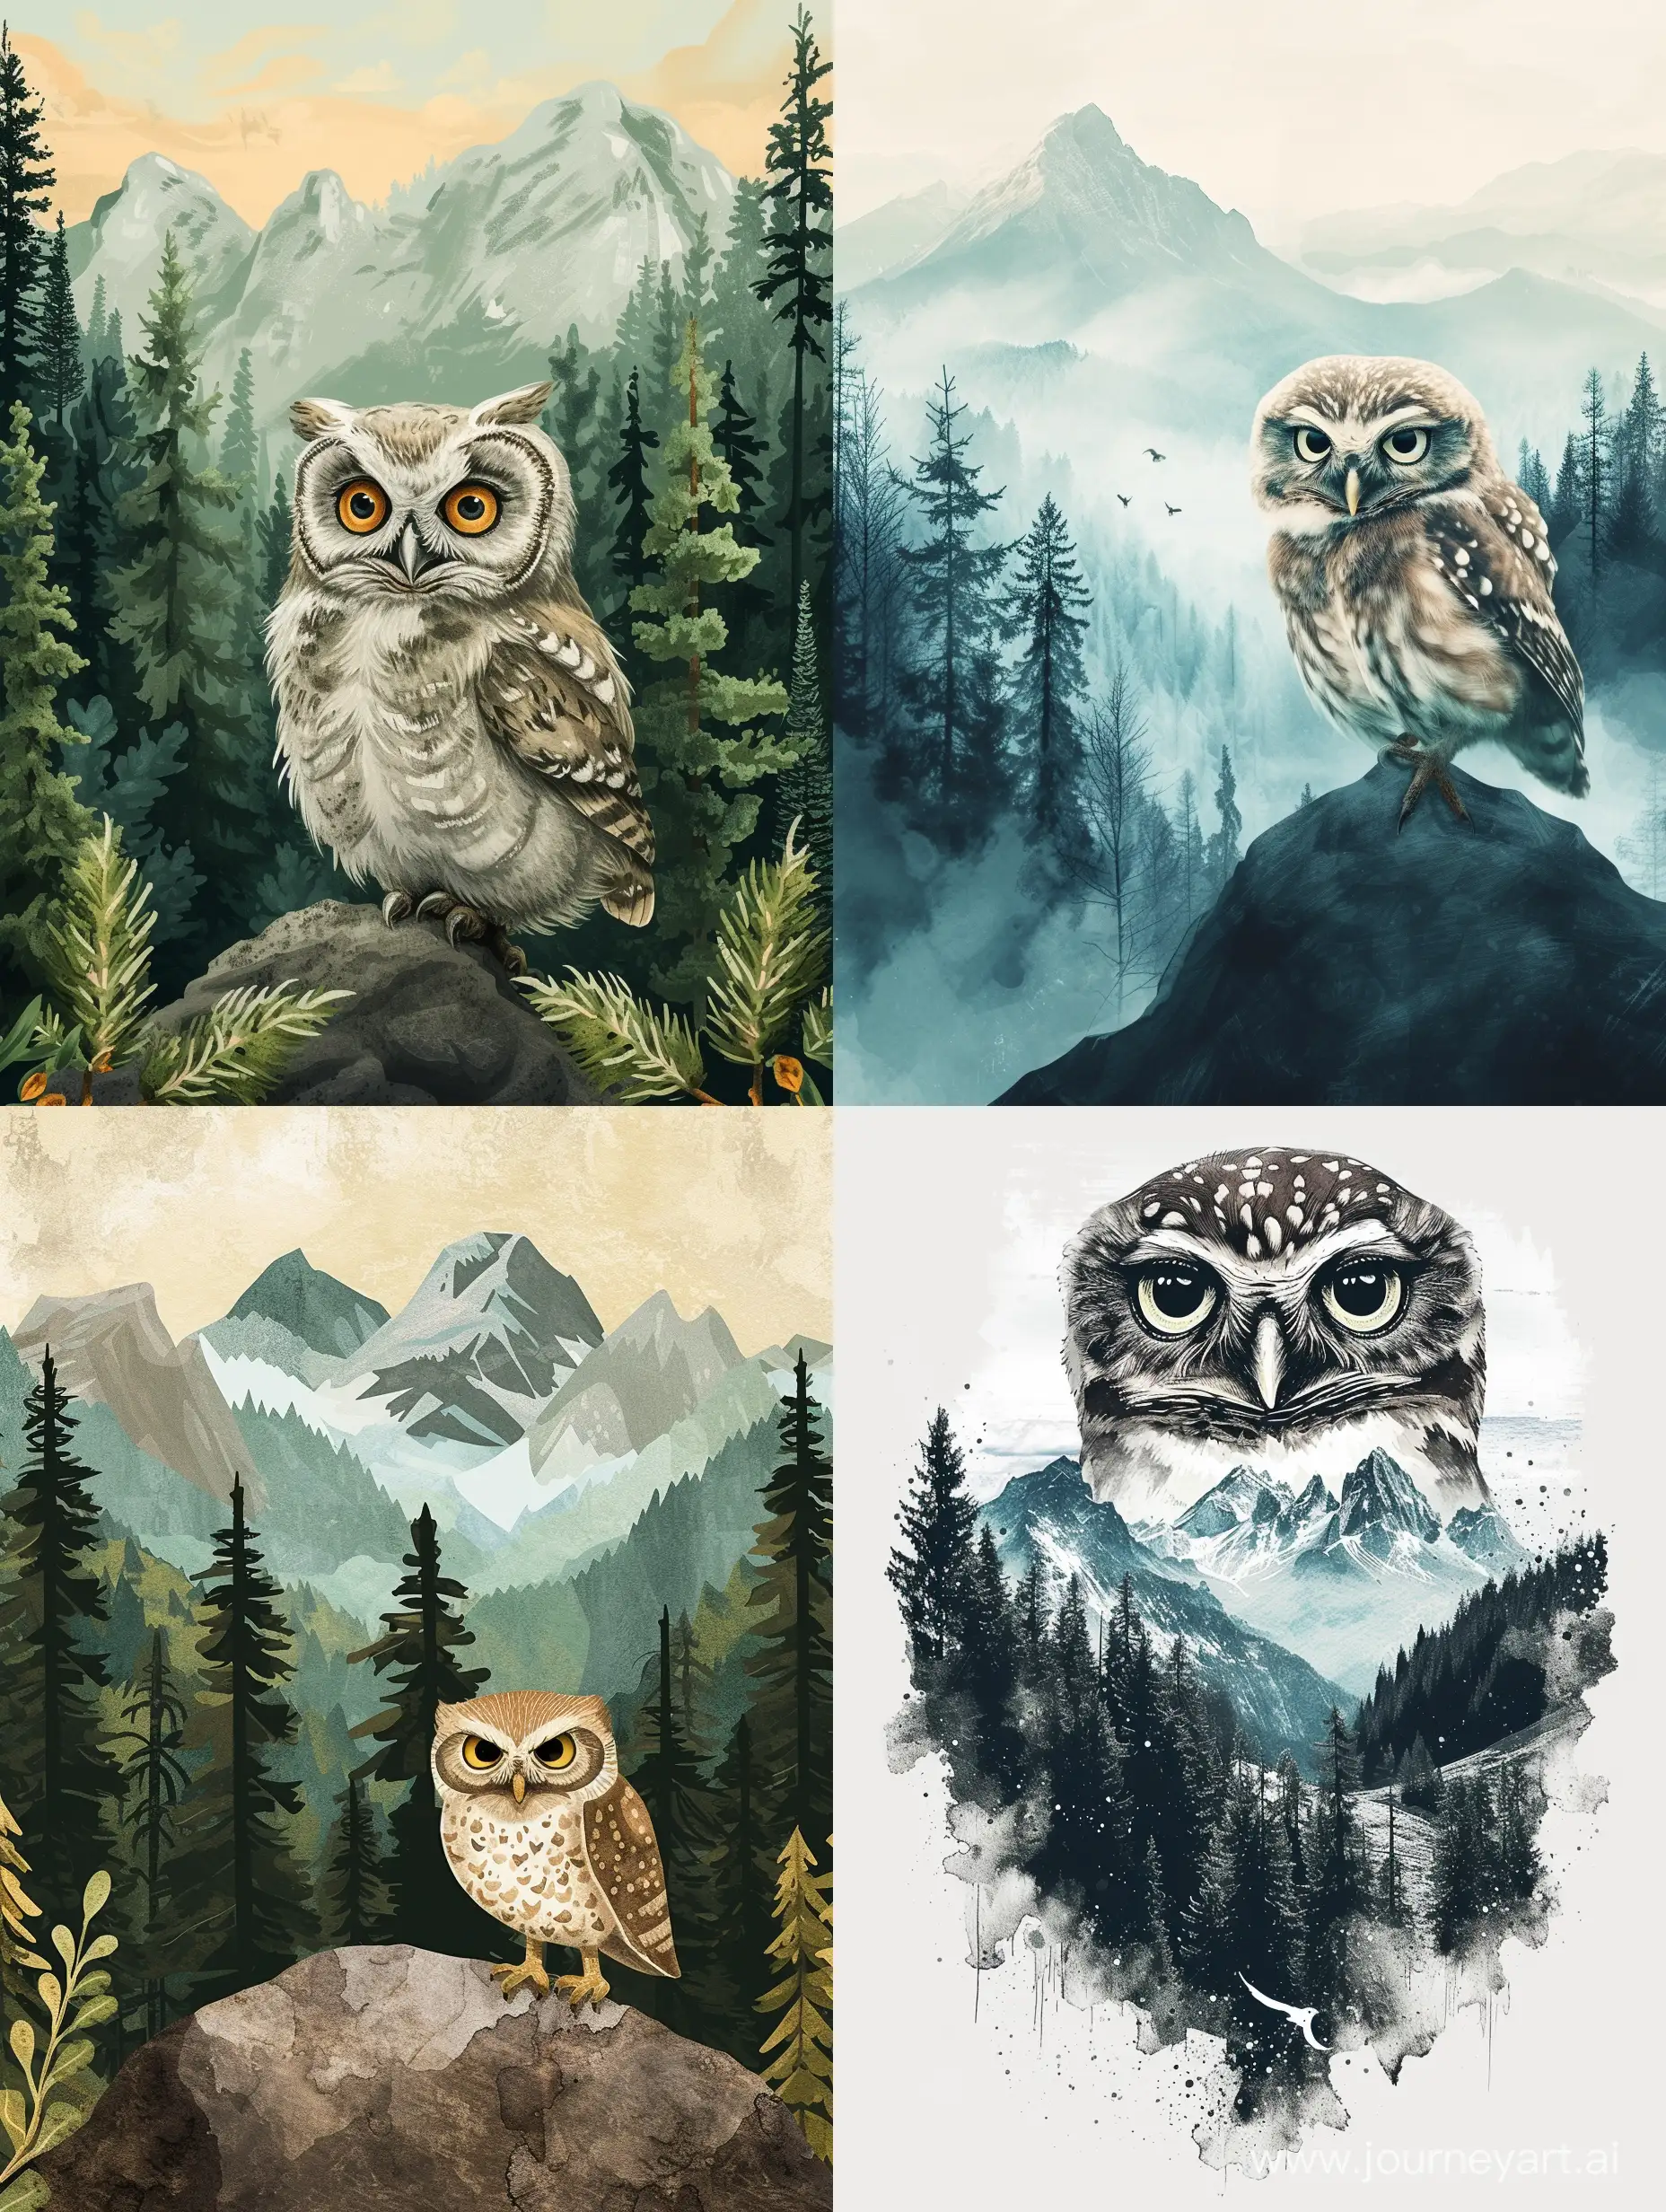 Enchanting-Forest-Scene-with-a-Small-Owl-Amidst-Mountains